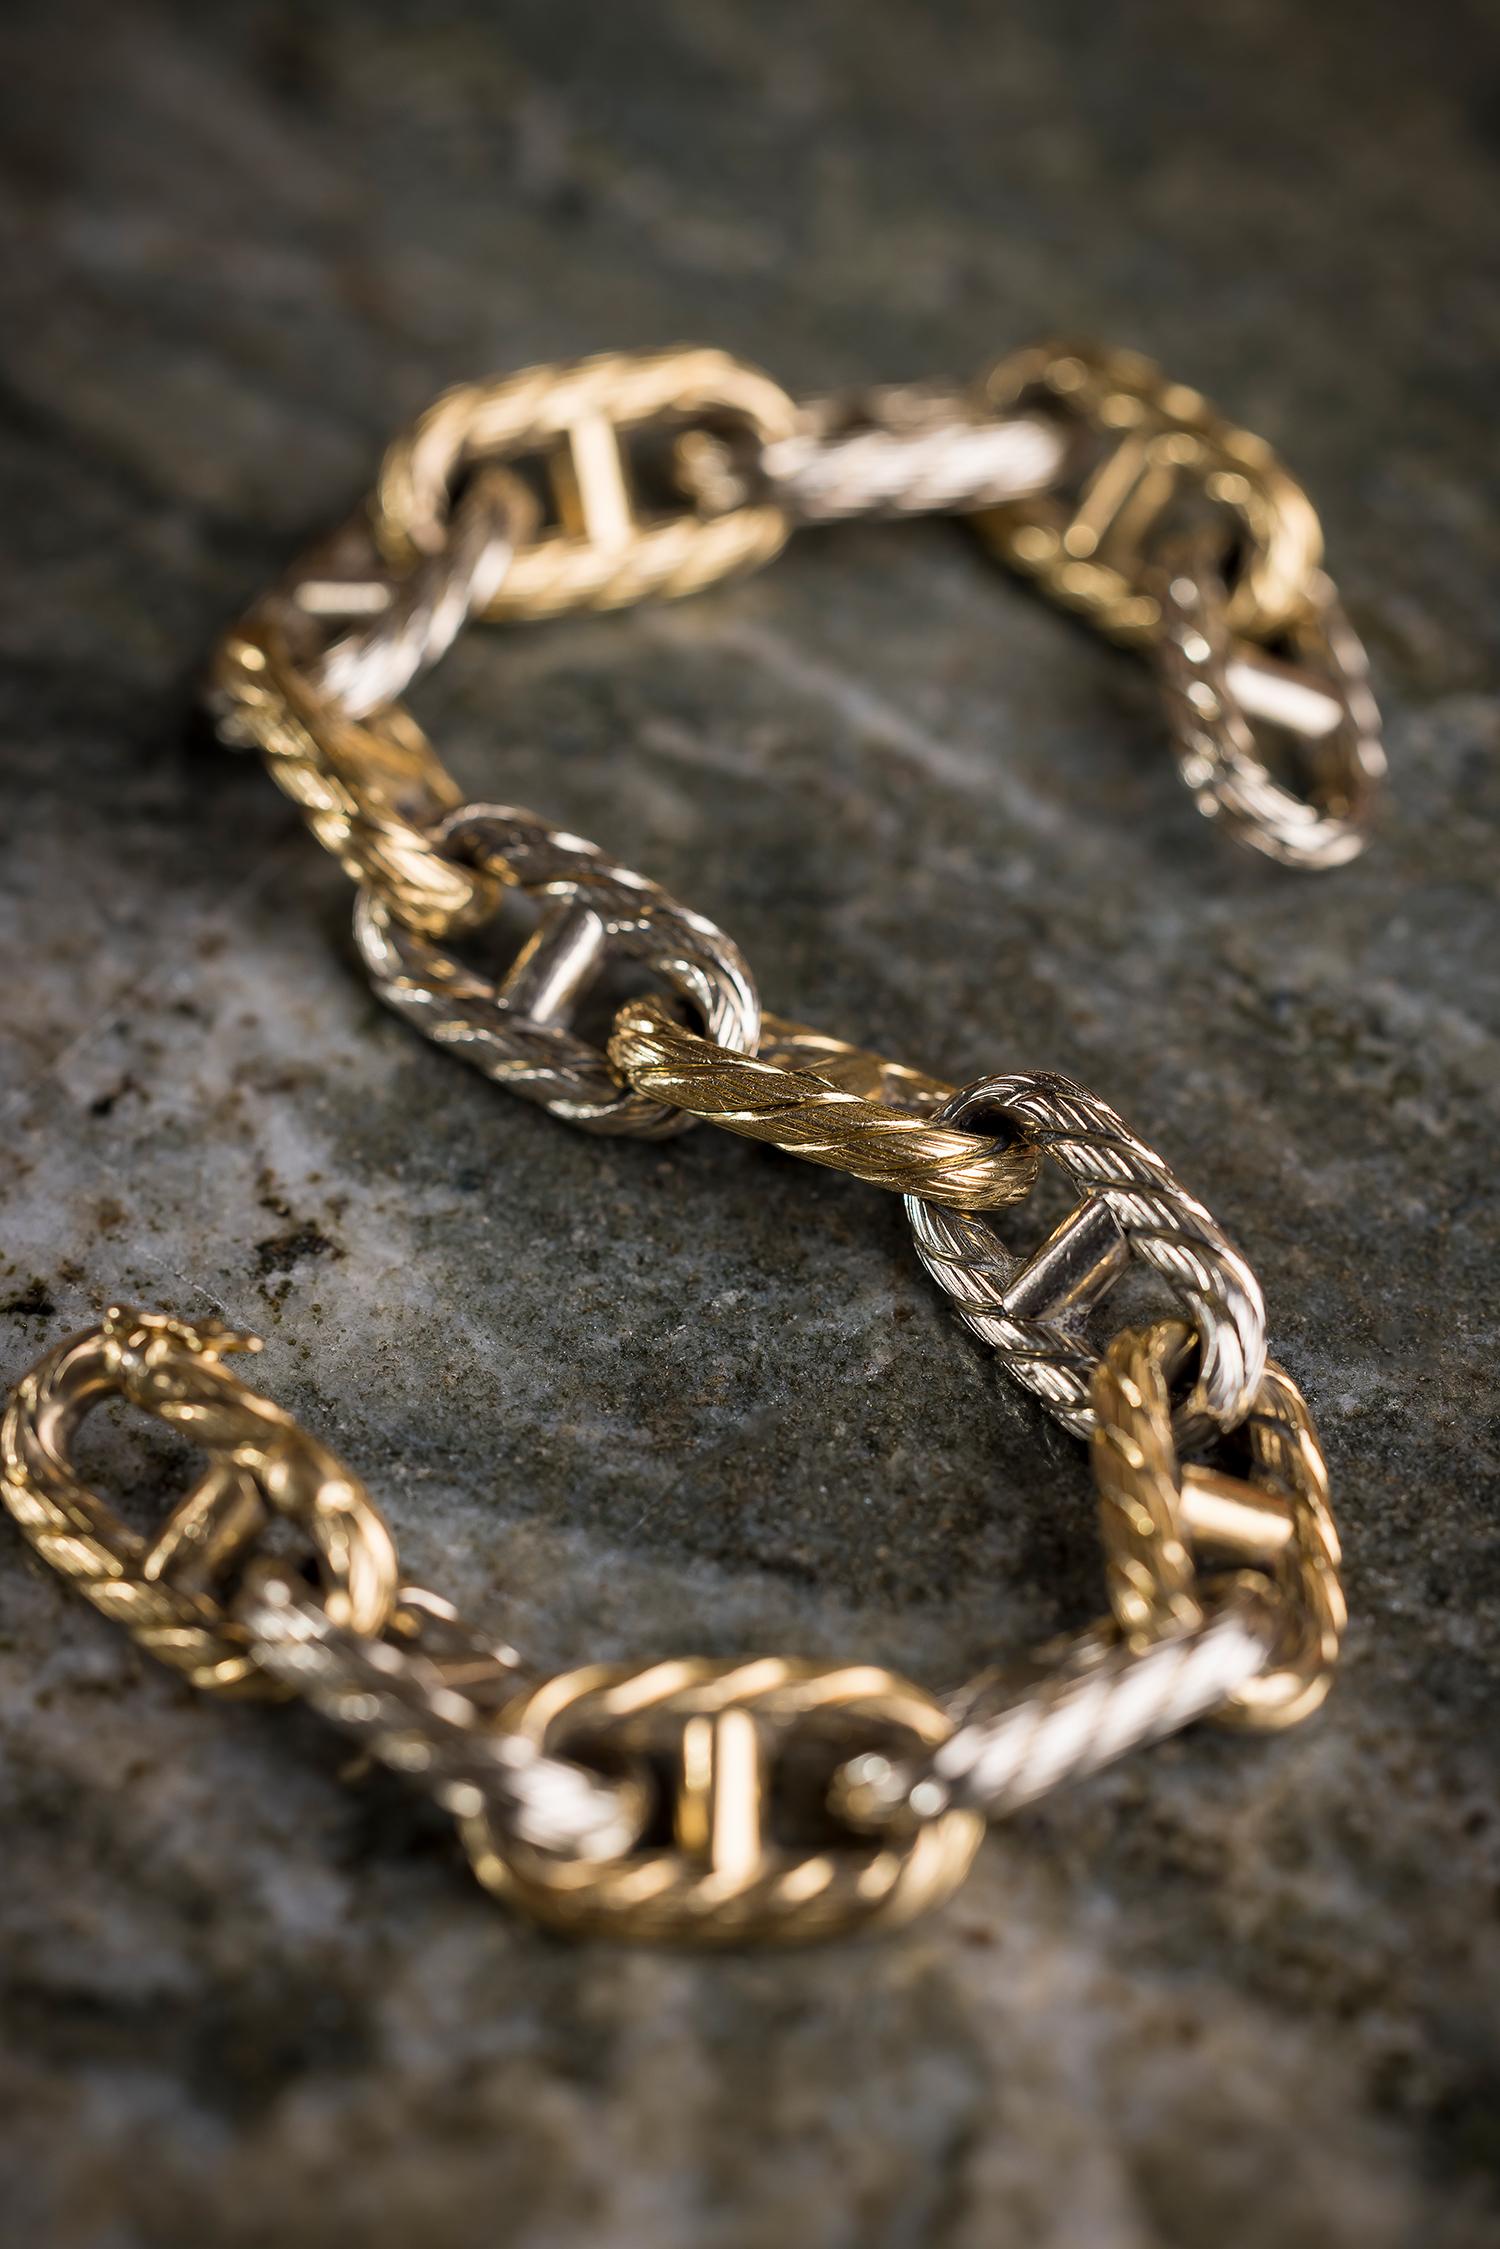 A solid and powerful version of a classic design. Love the texture and how tactile this versatile bracelet is. Keep yourself anchored in this two tone gold bracelet

This bracelet was made by Carlo Weingrill in the 1950s. This has been confirmed in